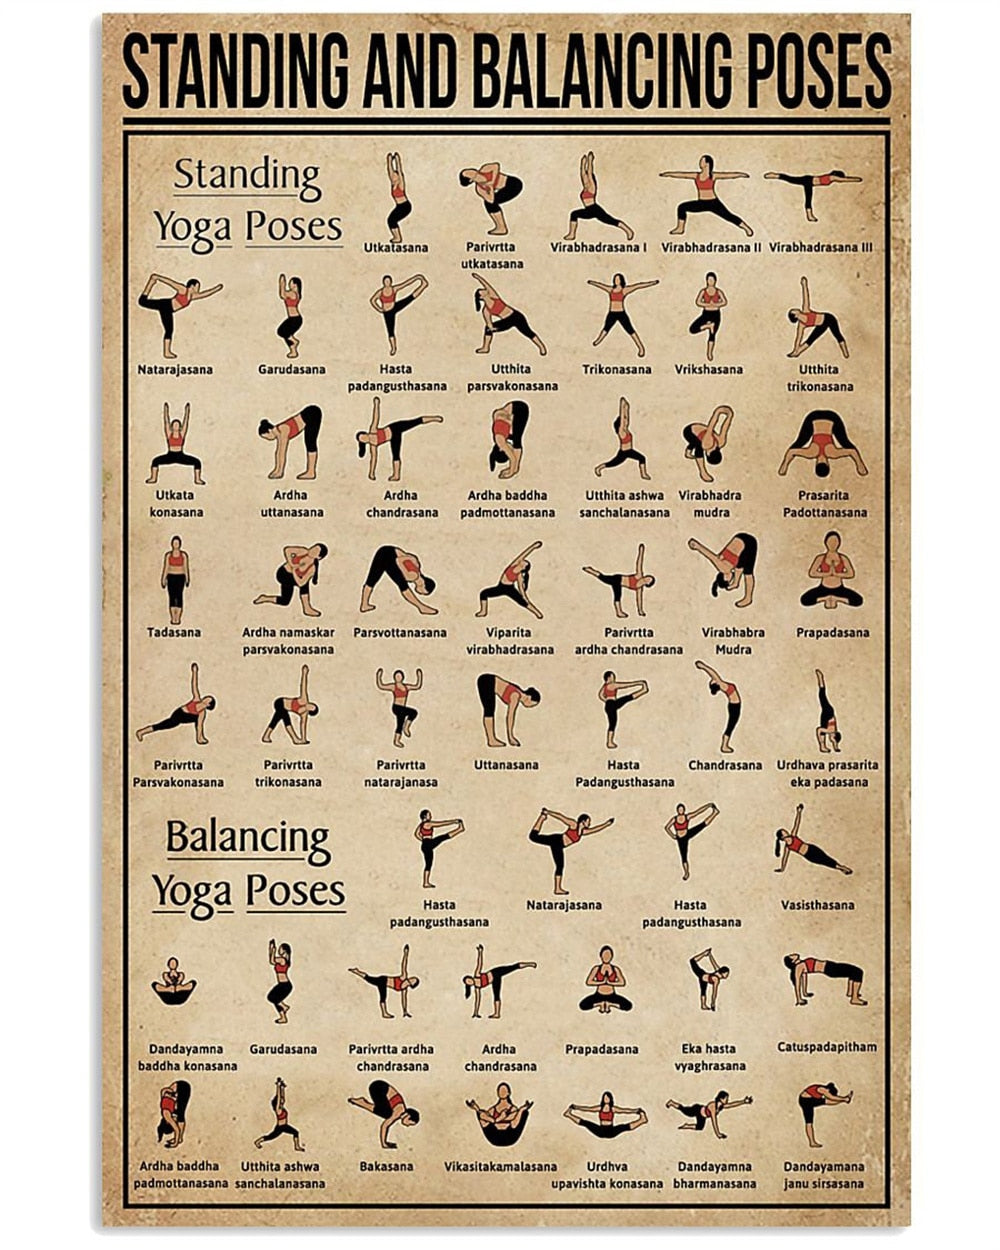 7 Chakras Knowledge Poster Yoga Chakra Awakening Vintage Print Knowledge Canvas Painting Modern Wall Art Pictures Home Decor - 20X30cm no frame / TP492-3 - 30X40cm no frame / TP492-3 - 40X60cm no frame / TP492-3 - 50X70cm no frame / TP492-3 - 60X90cm no frame / TP492-3 - 40X50cm no frame / TP492-3 - 20X30cm with Frame / TP492-3 - 30X40cm with Frame / TP492-3 - 40X60cmX DIY Frame / TP492-3 - 50X70cmX DIY Frame / TP492-3 - 60X90cmX DIY Frame / TP492-3